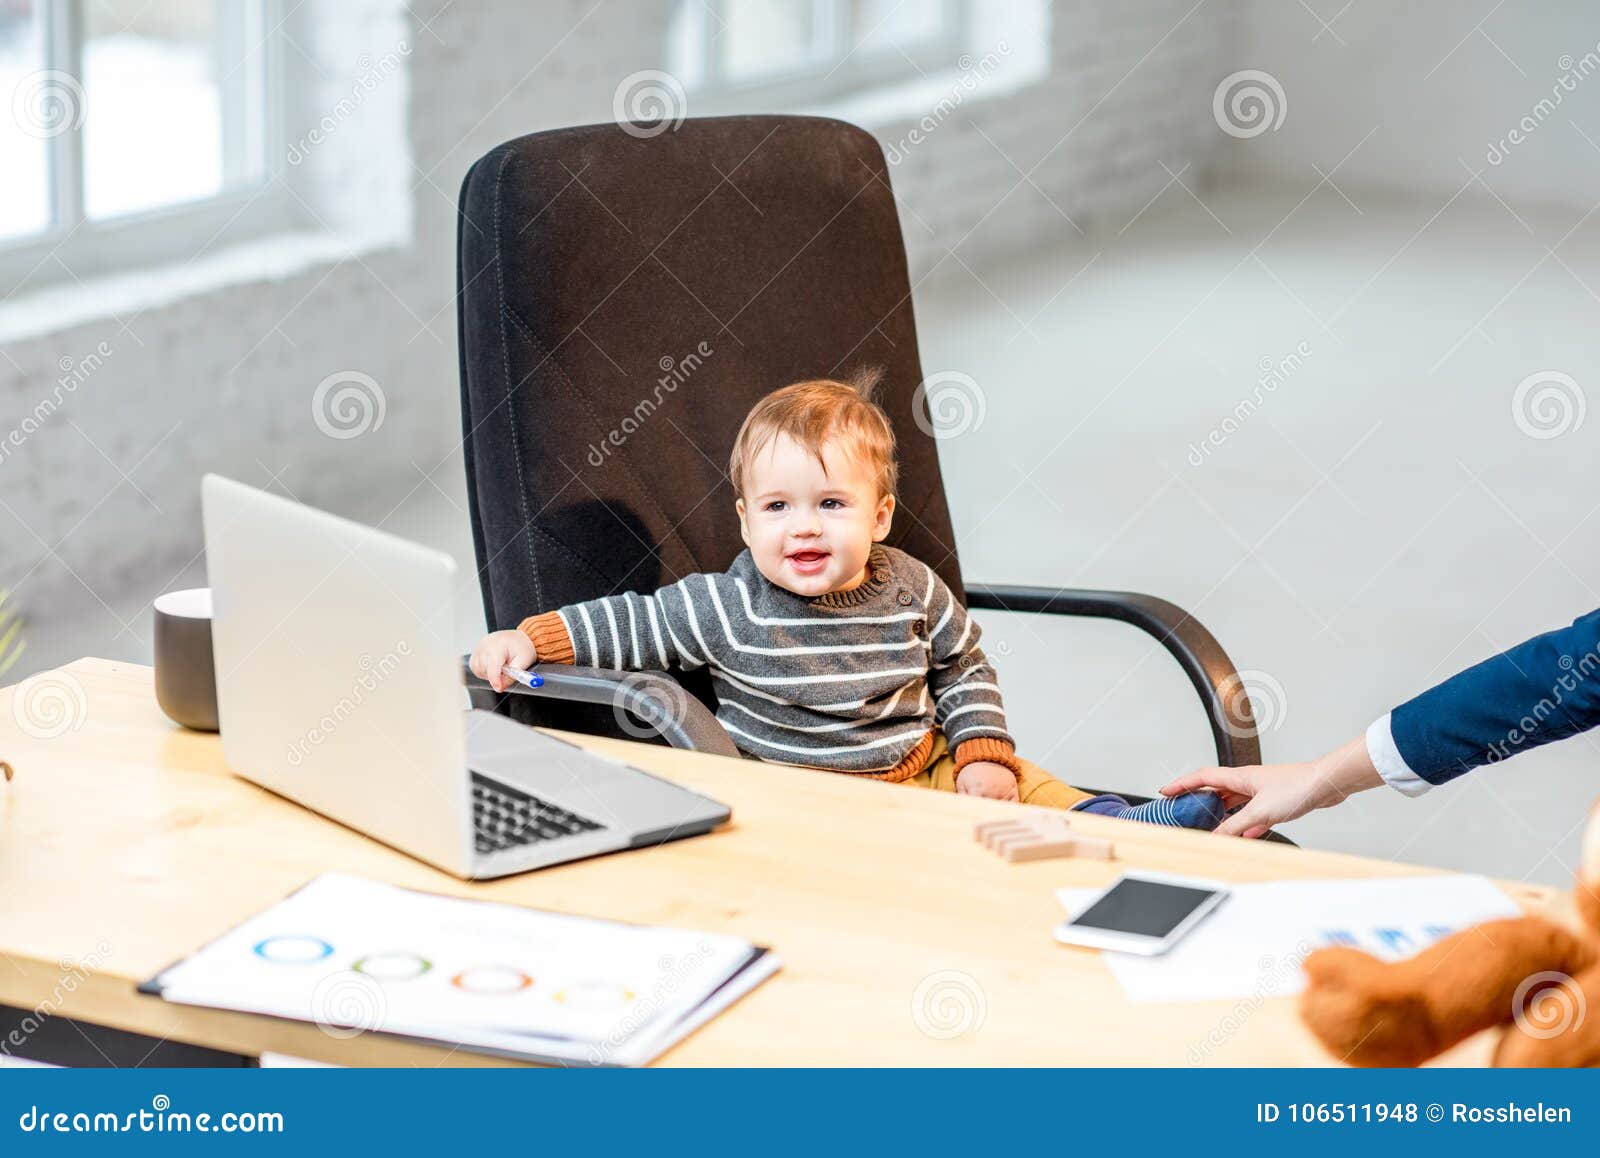 Baby boss at the office stock photo. Image of infant - 106511948